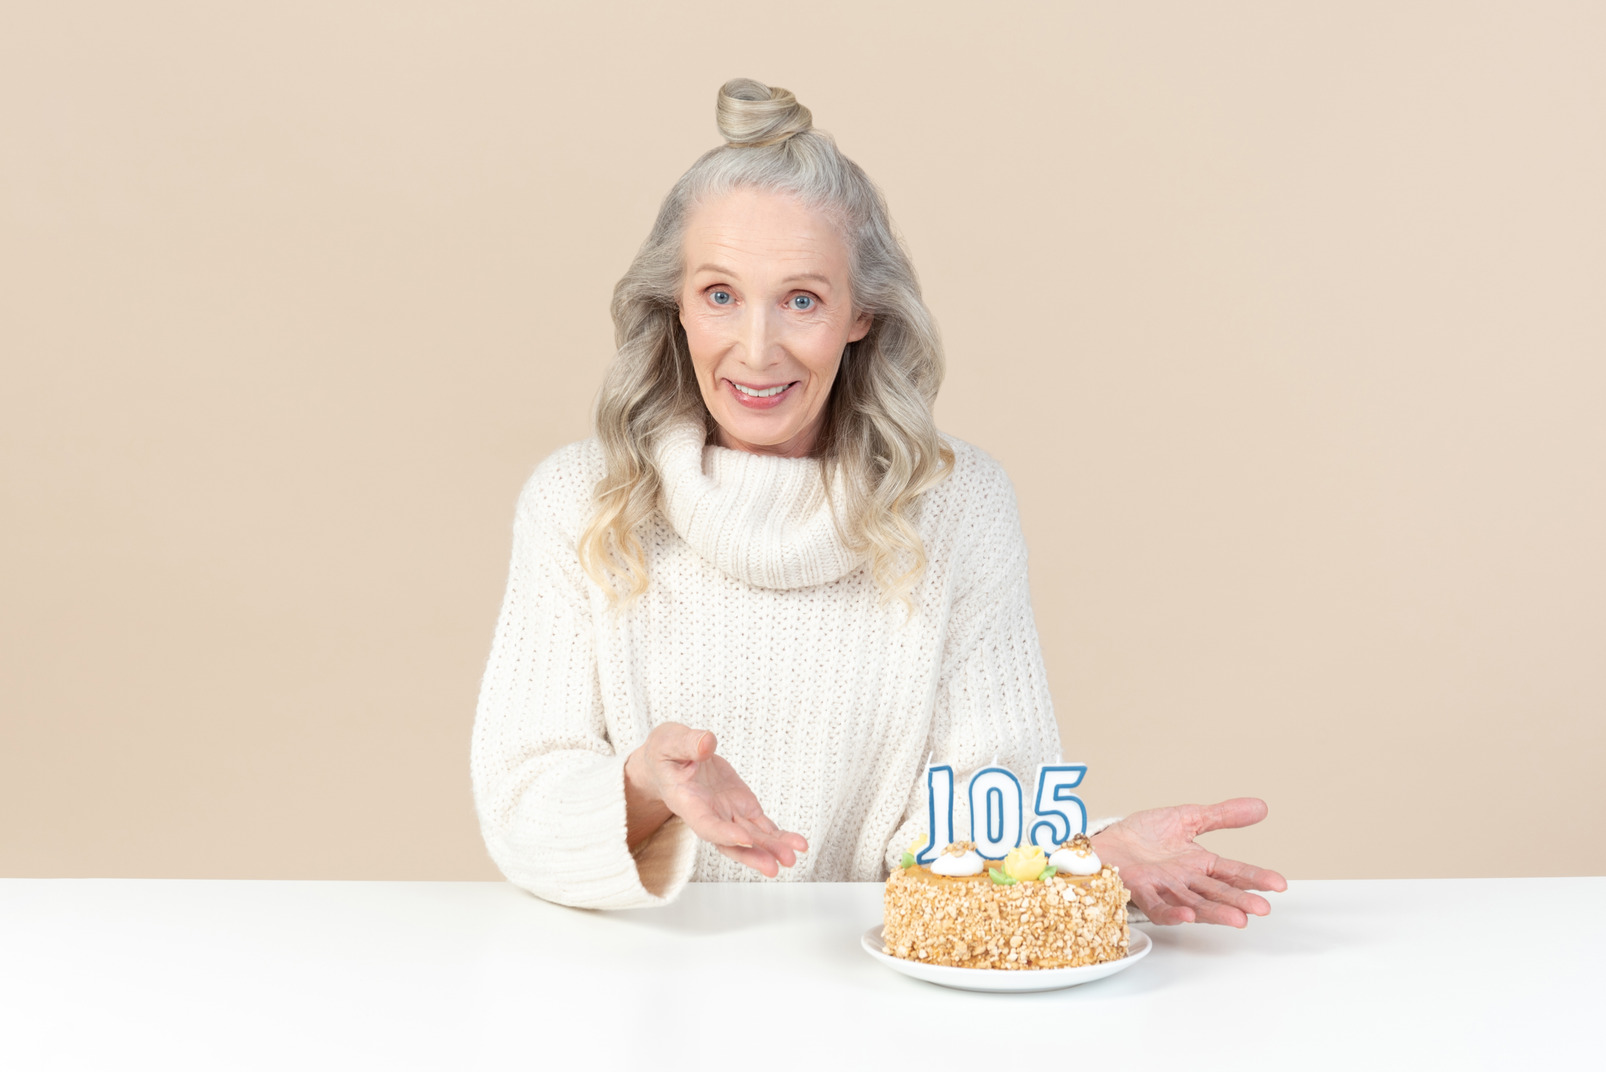 Old woman pointing on cake to her hundred and fifth birthday